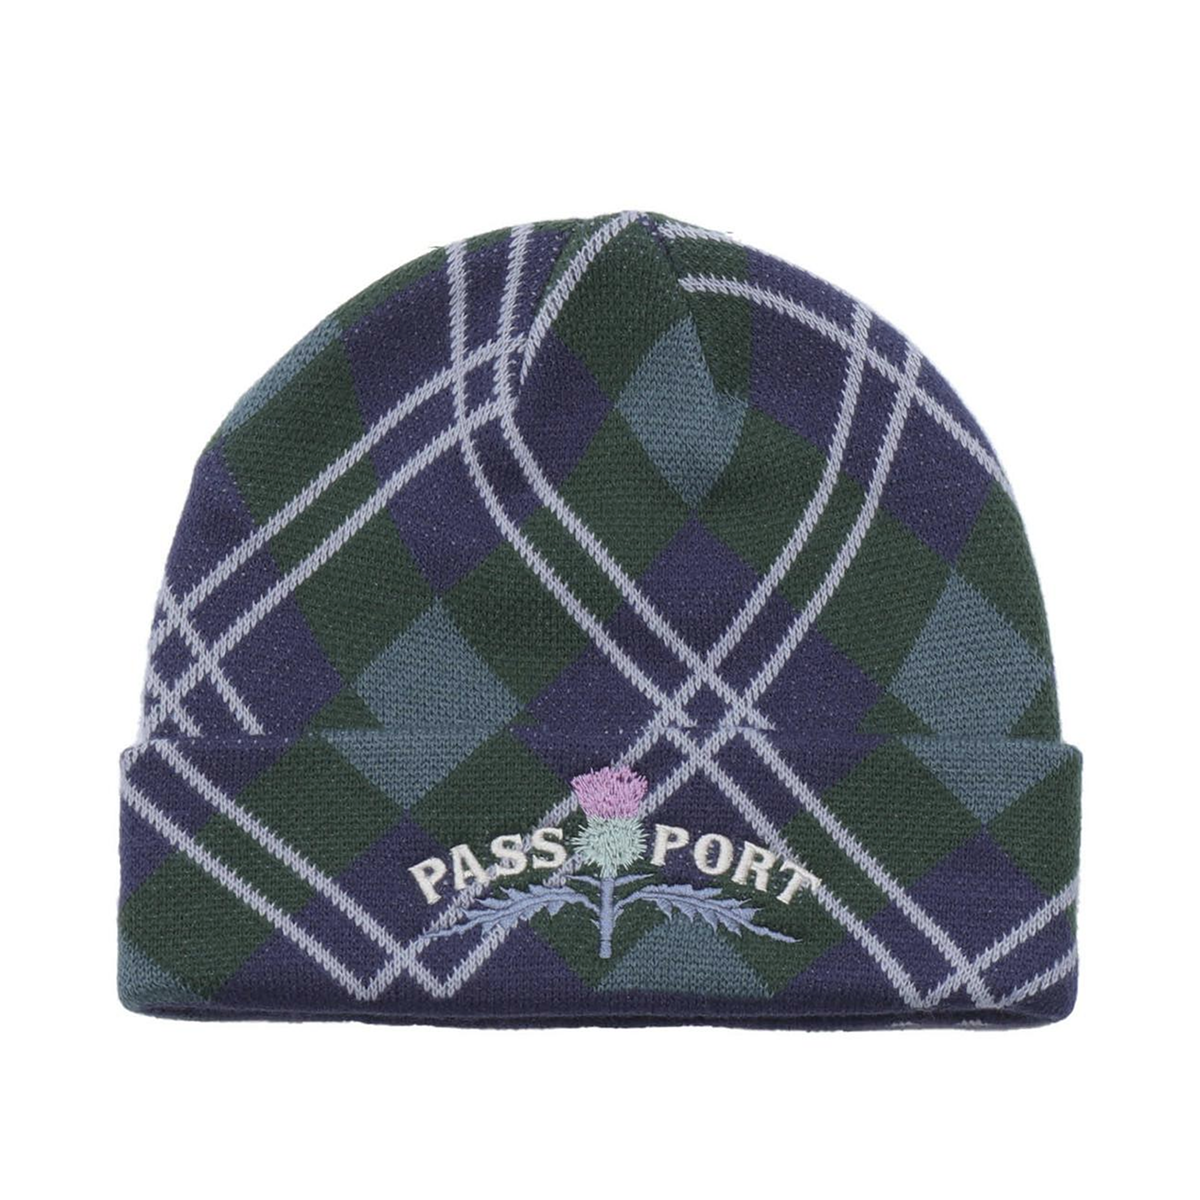 Passport Thistle Beanie - Assorted Colors